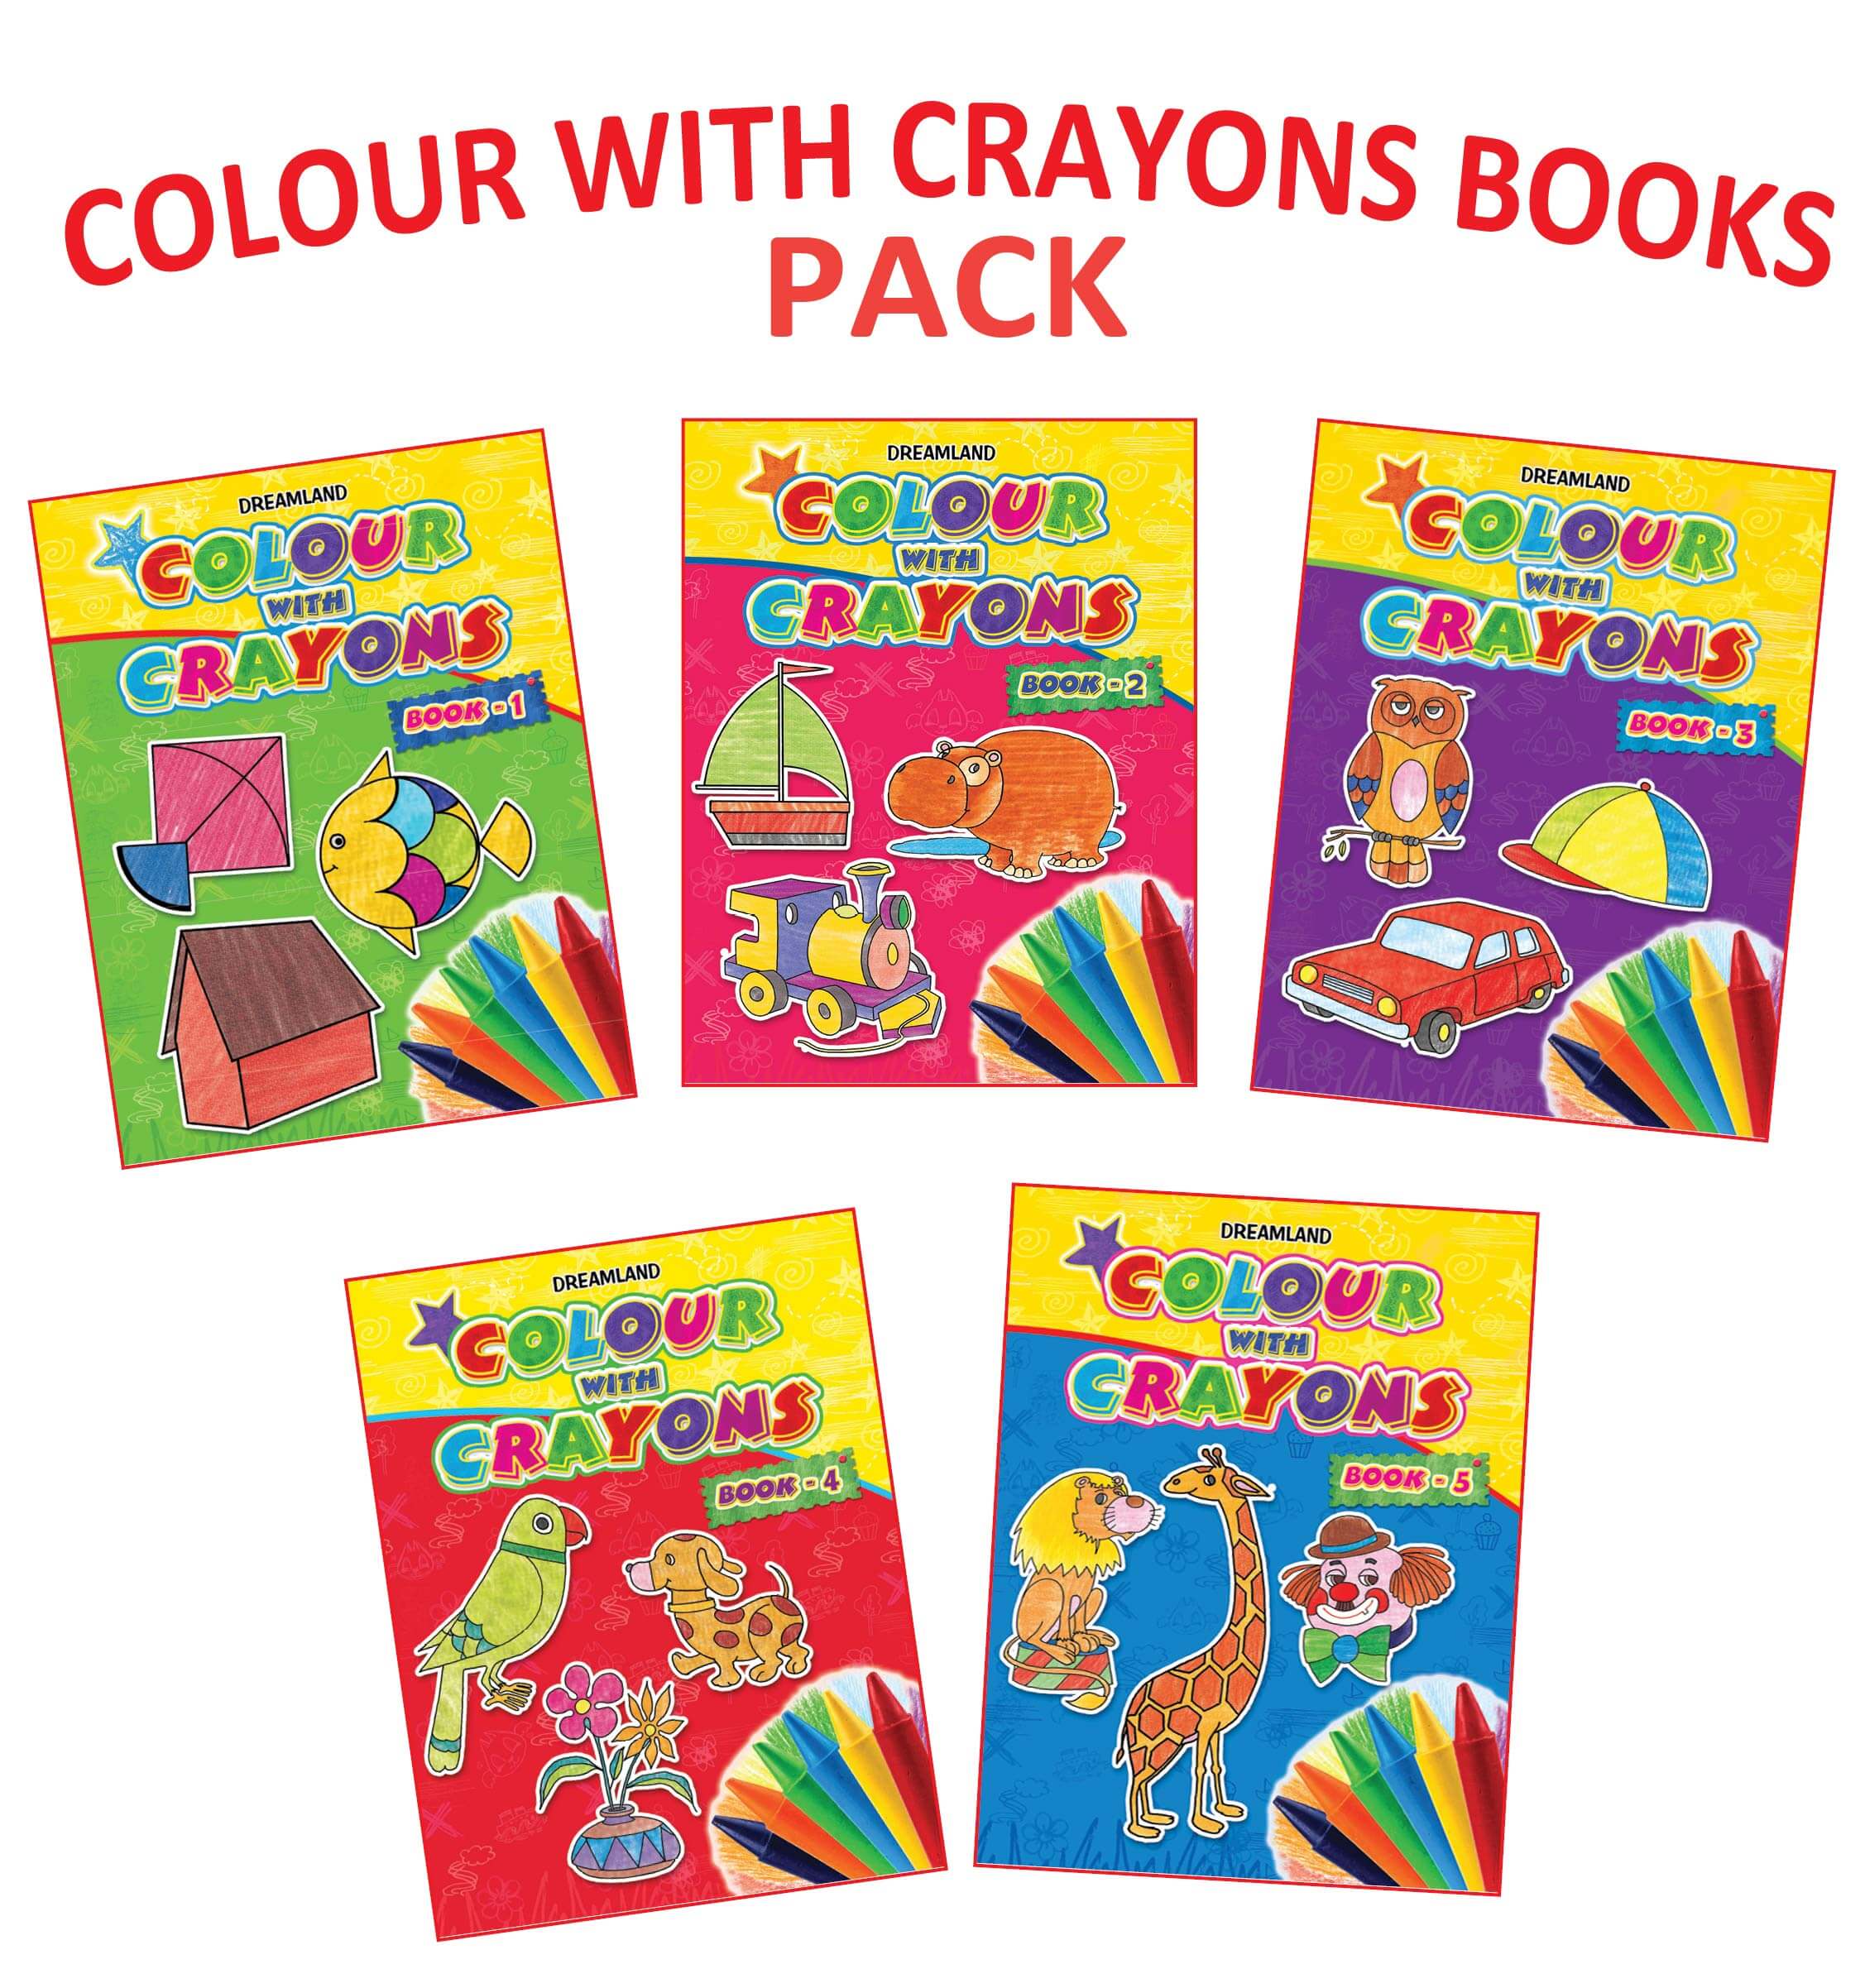 Colour With Crayons 1 to 5 (Pack)